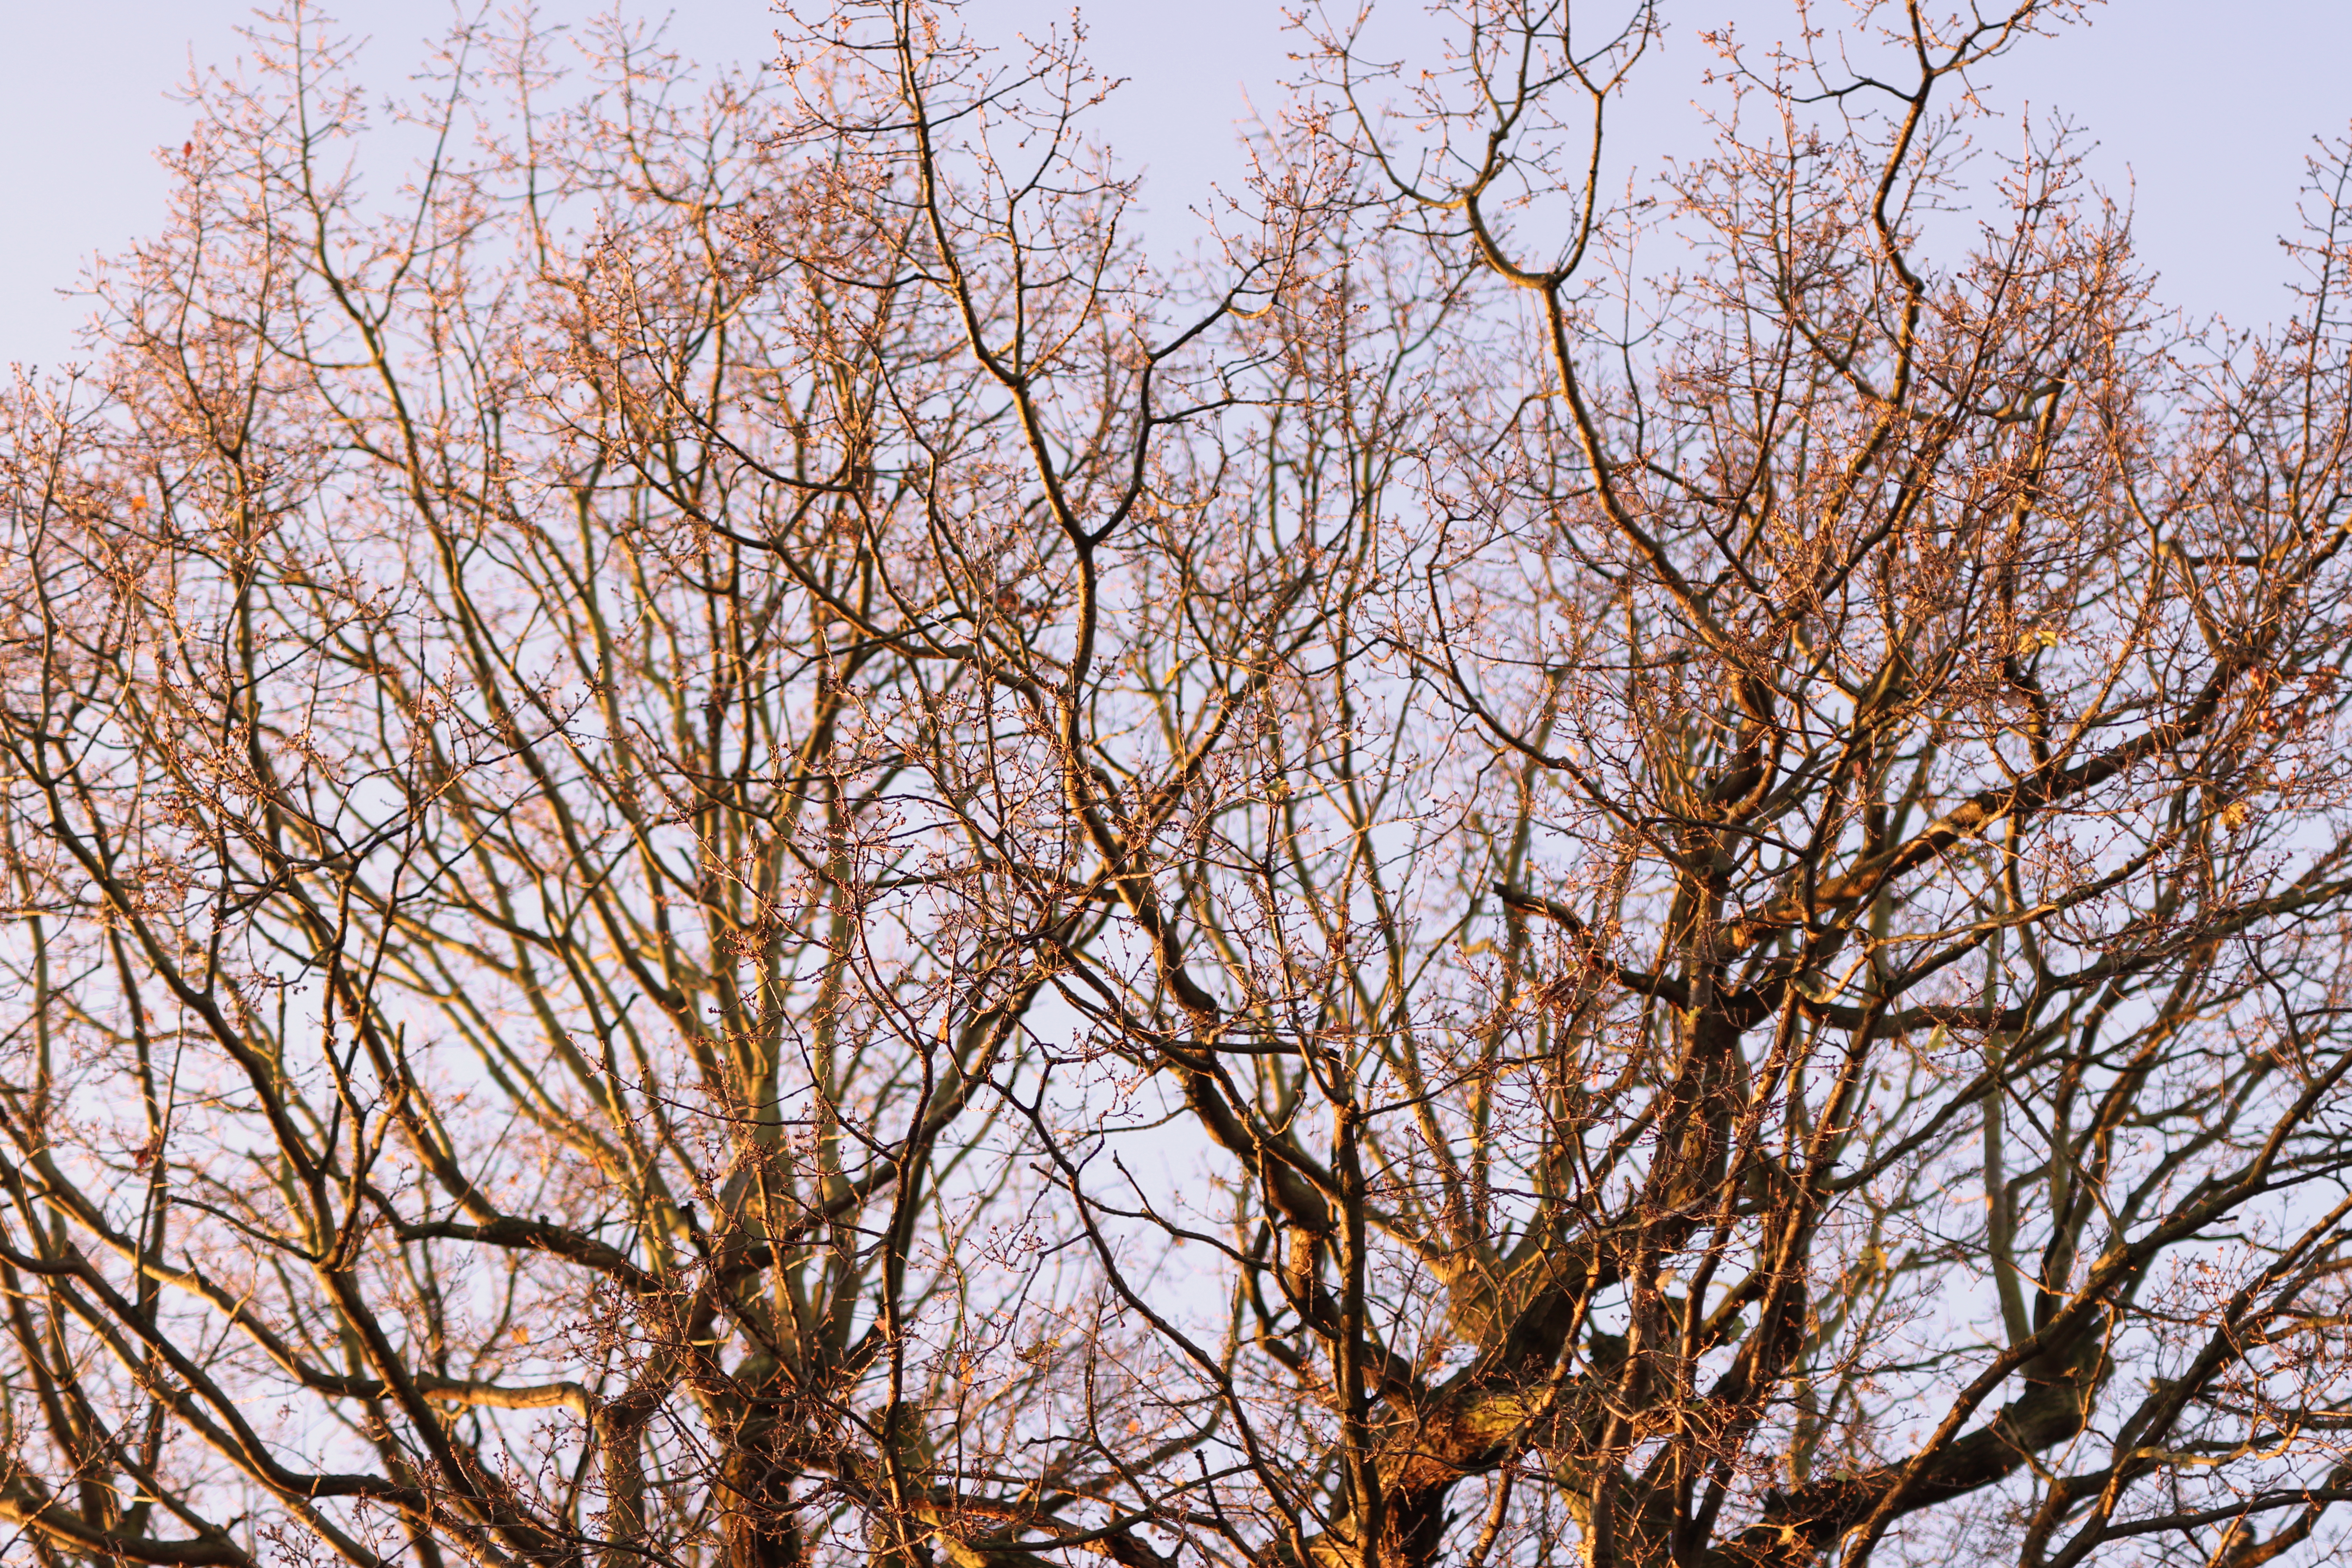 The bare winter branches of the top of an oak tree canopy